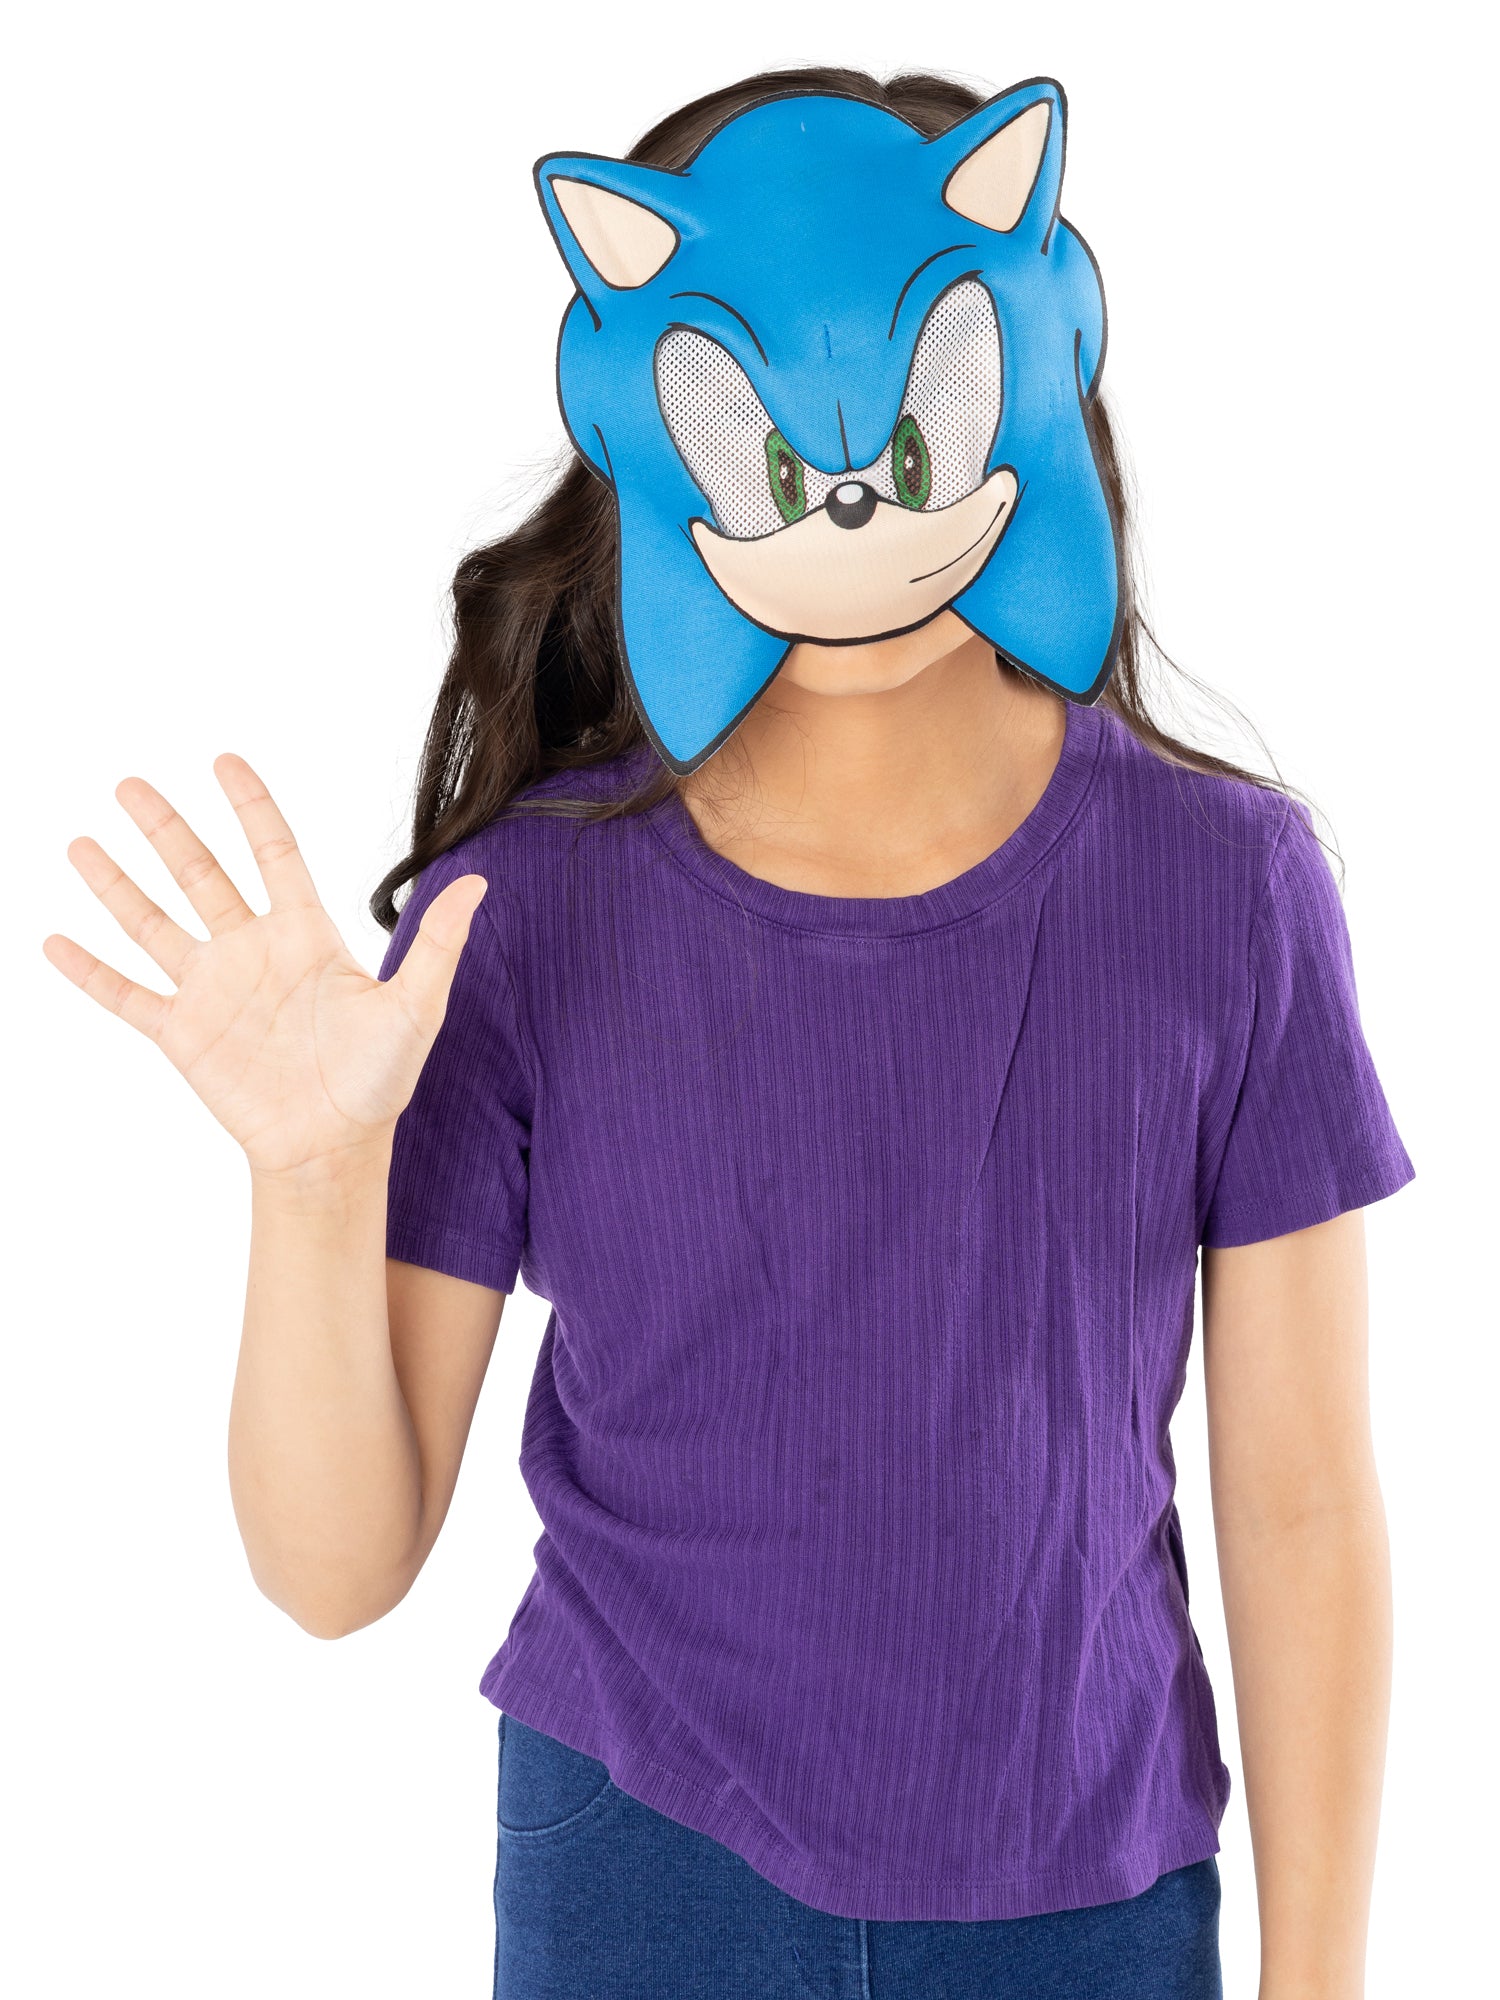 Sonic The Hedgehog, Blue, Sega, Accessories, One Size, Front